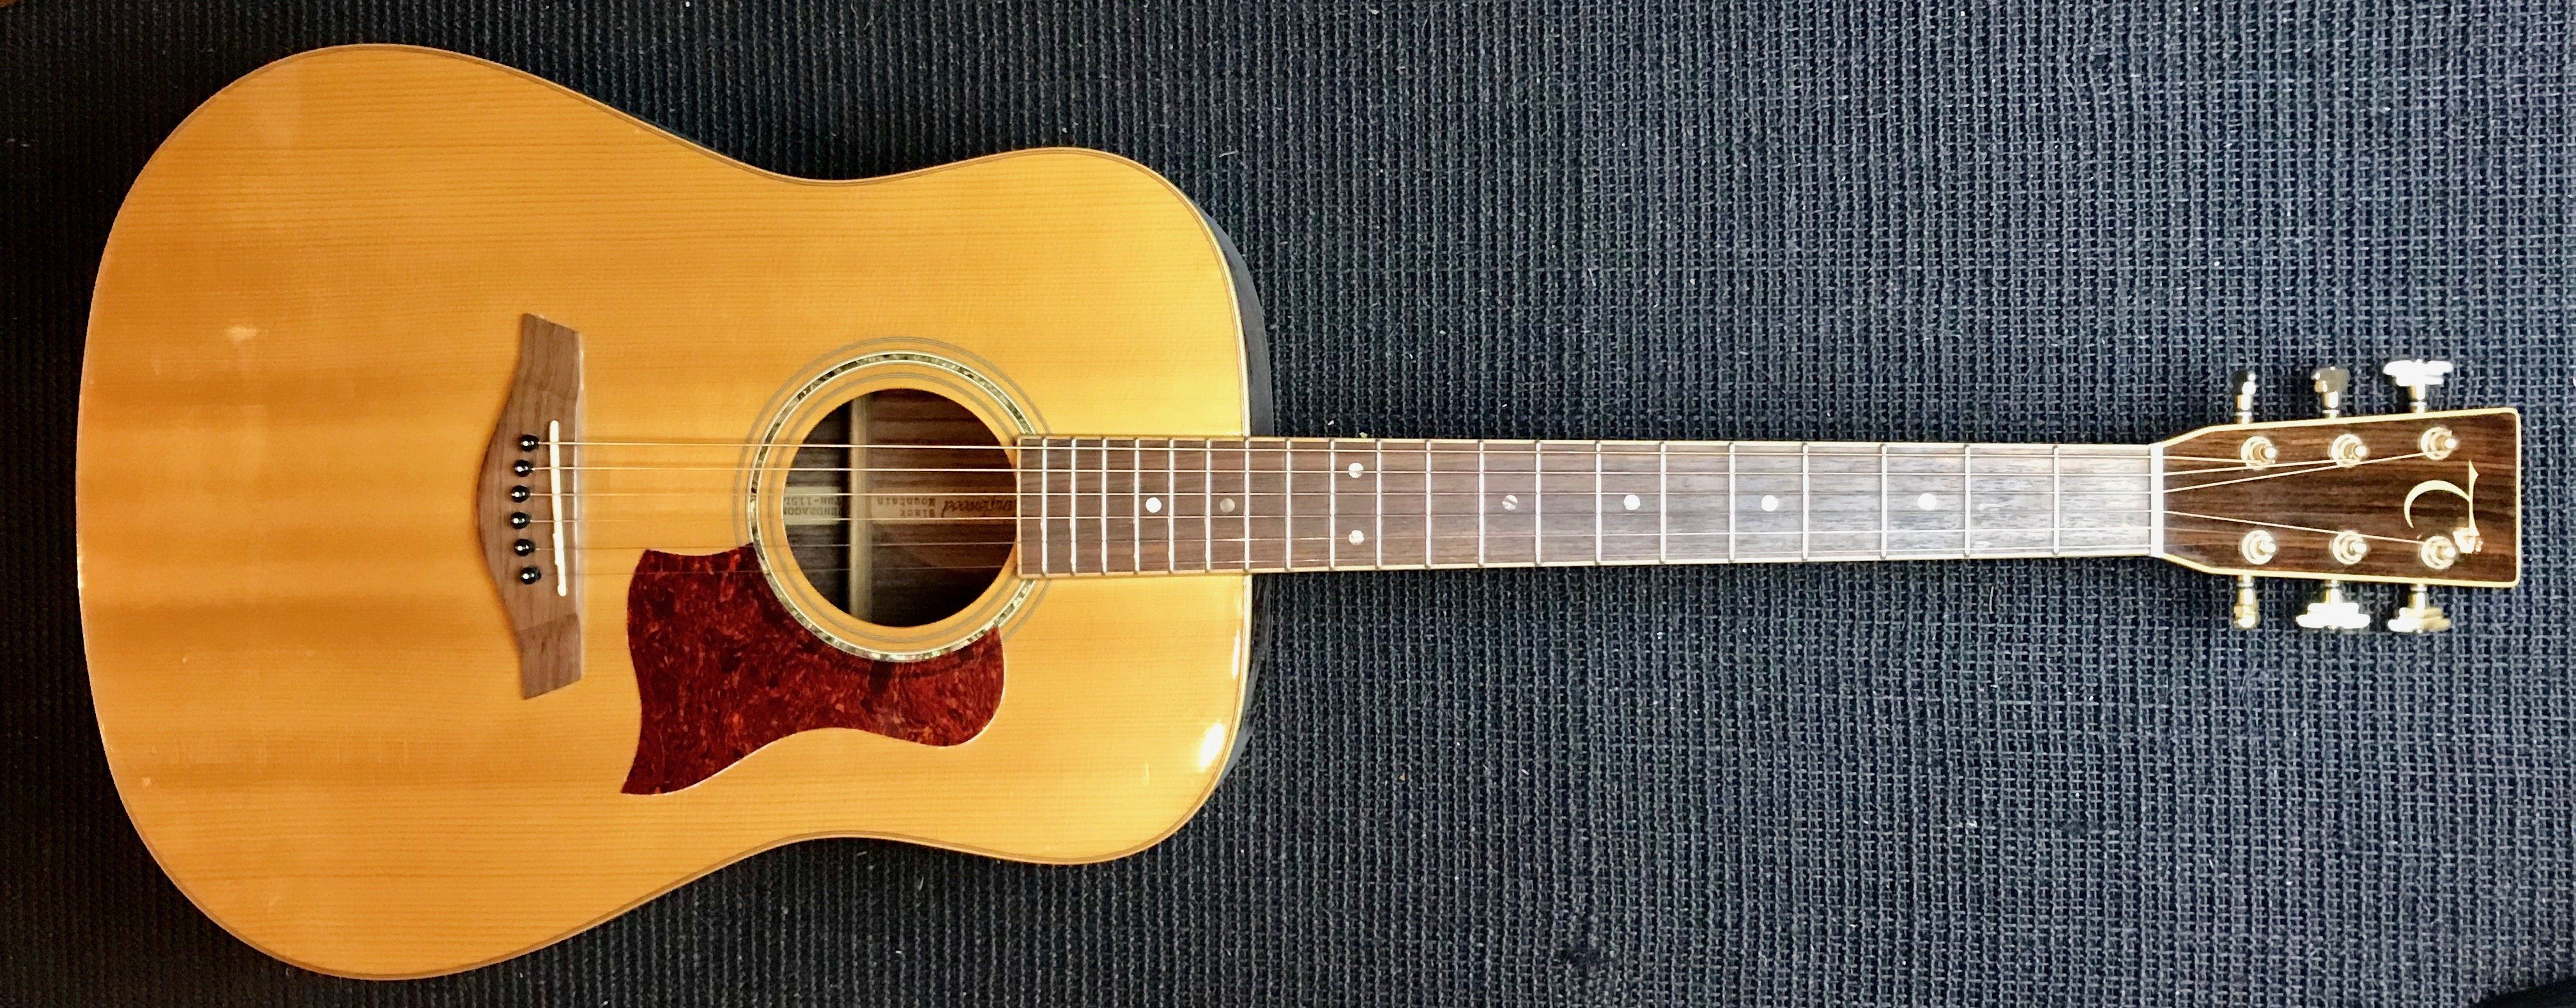 Tanglewood Black Mountain Acoustic Guitar (Used), Acoustic Guitar for sale at Richards Guitars.